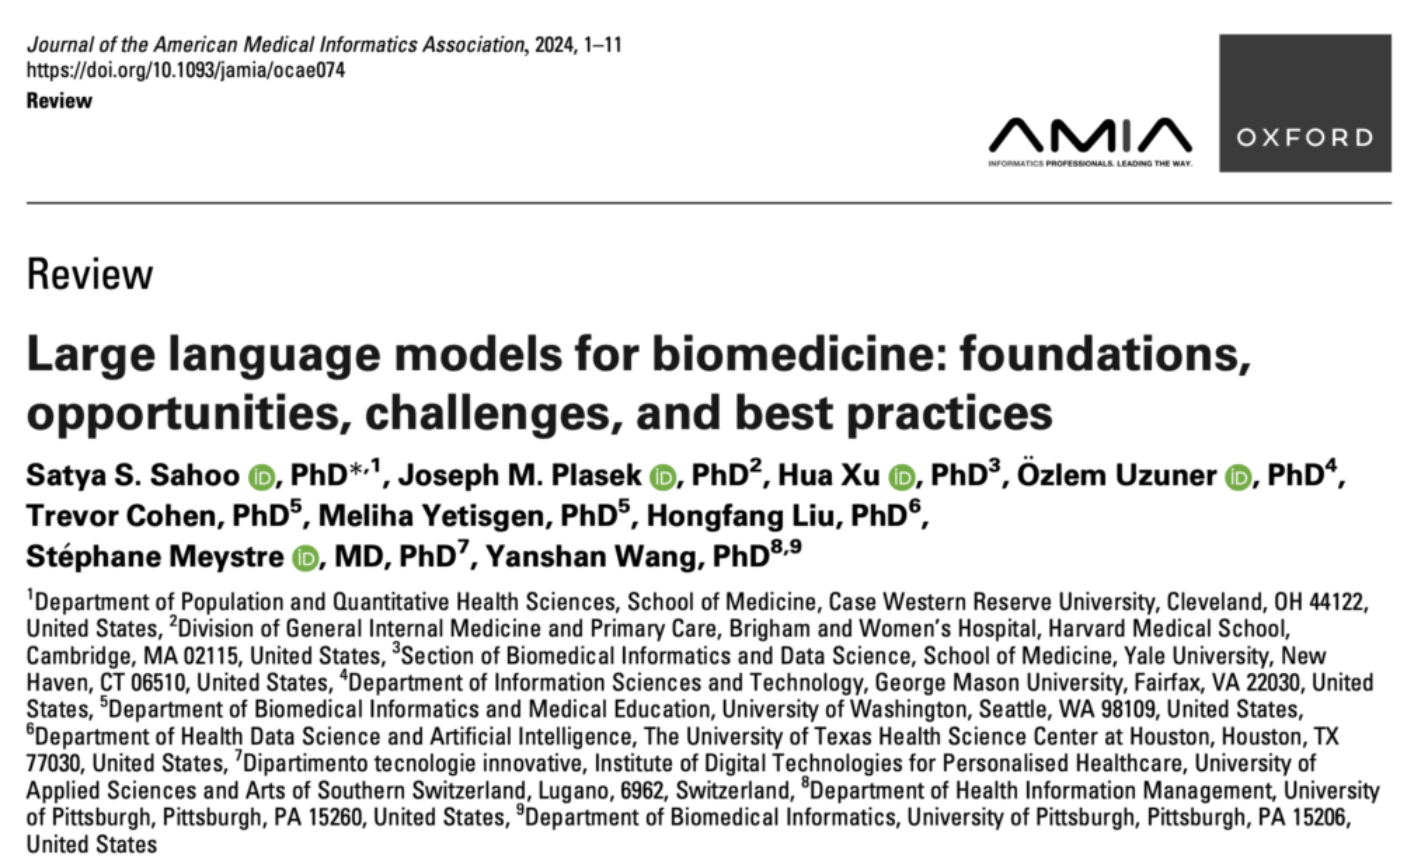 Large language models for biomedicine: foundations, opportunities, challenges, and best practices